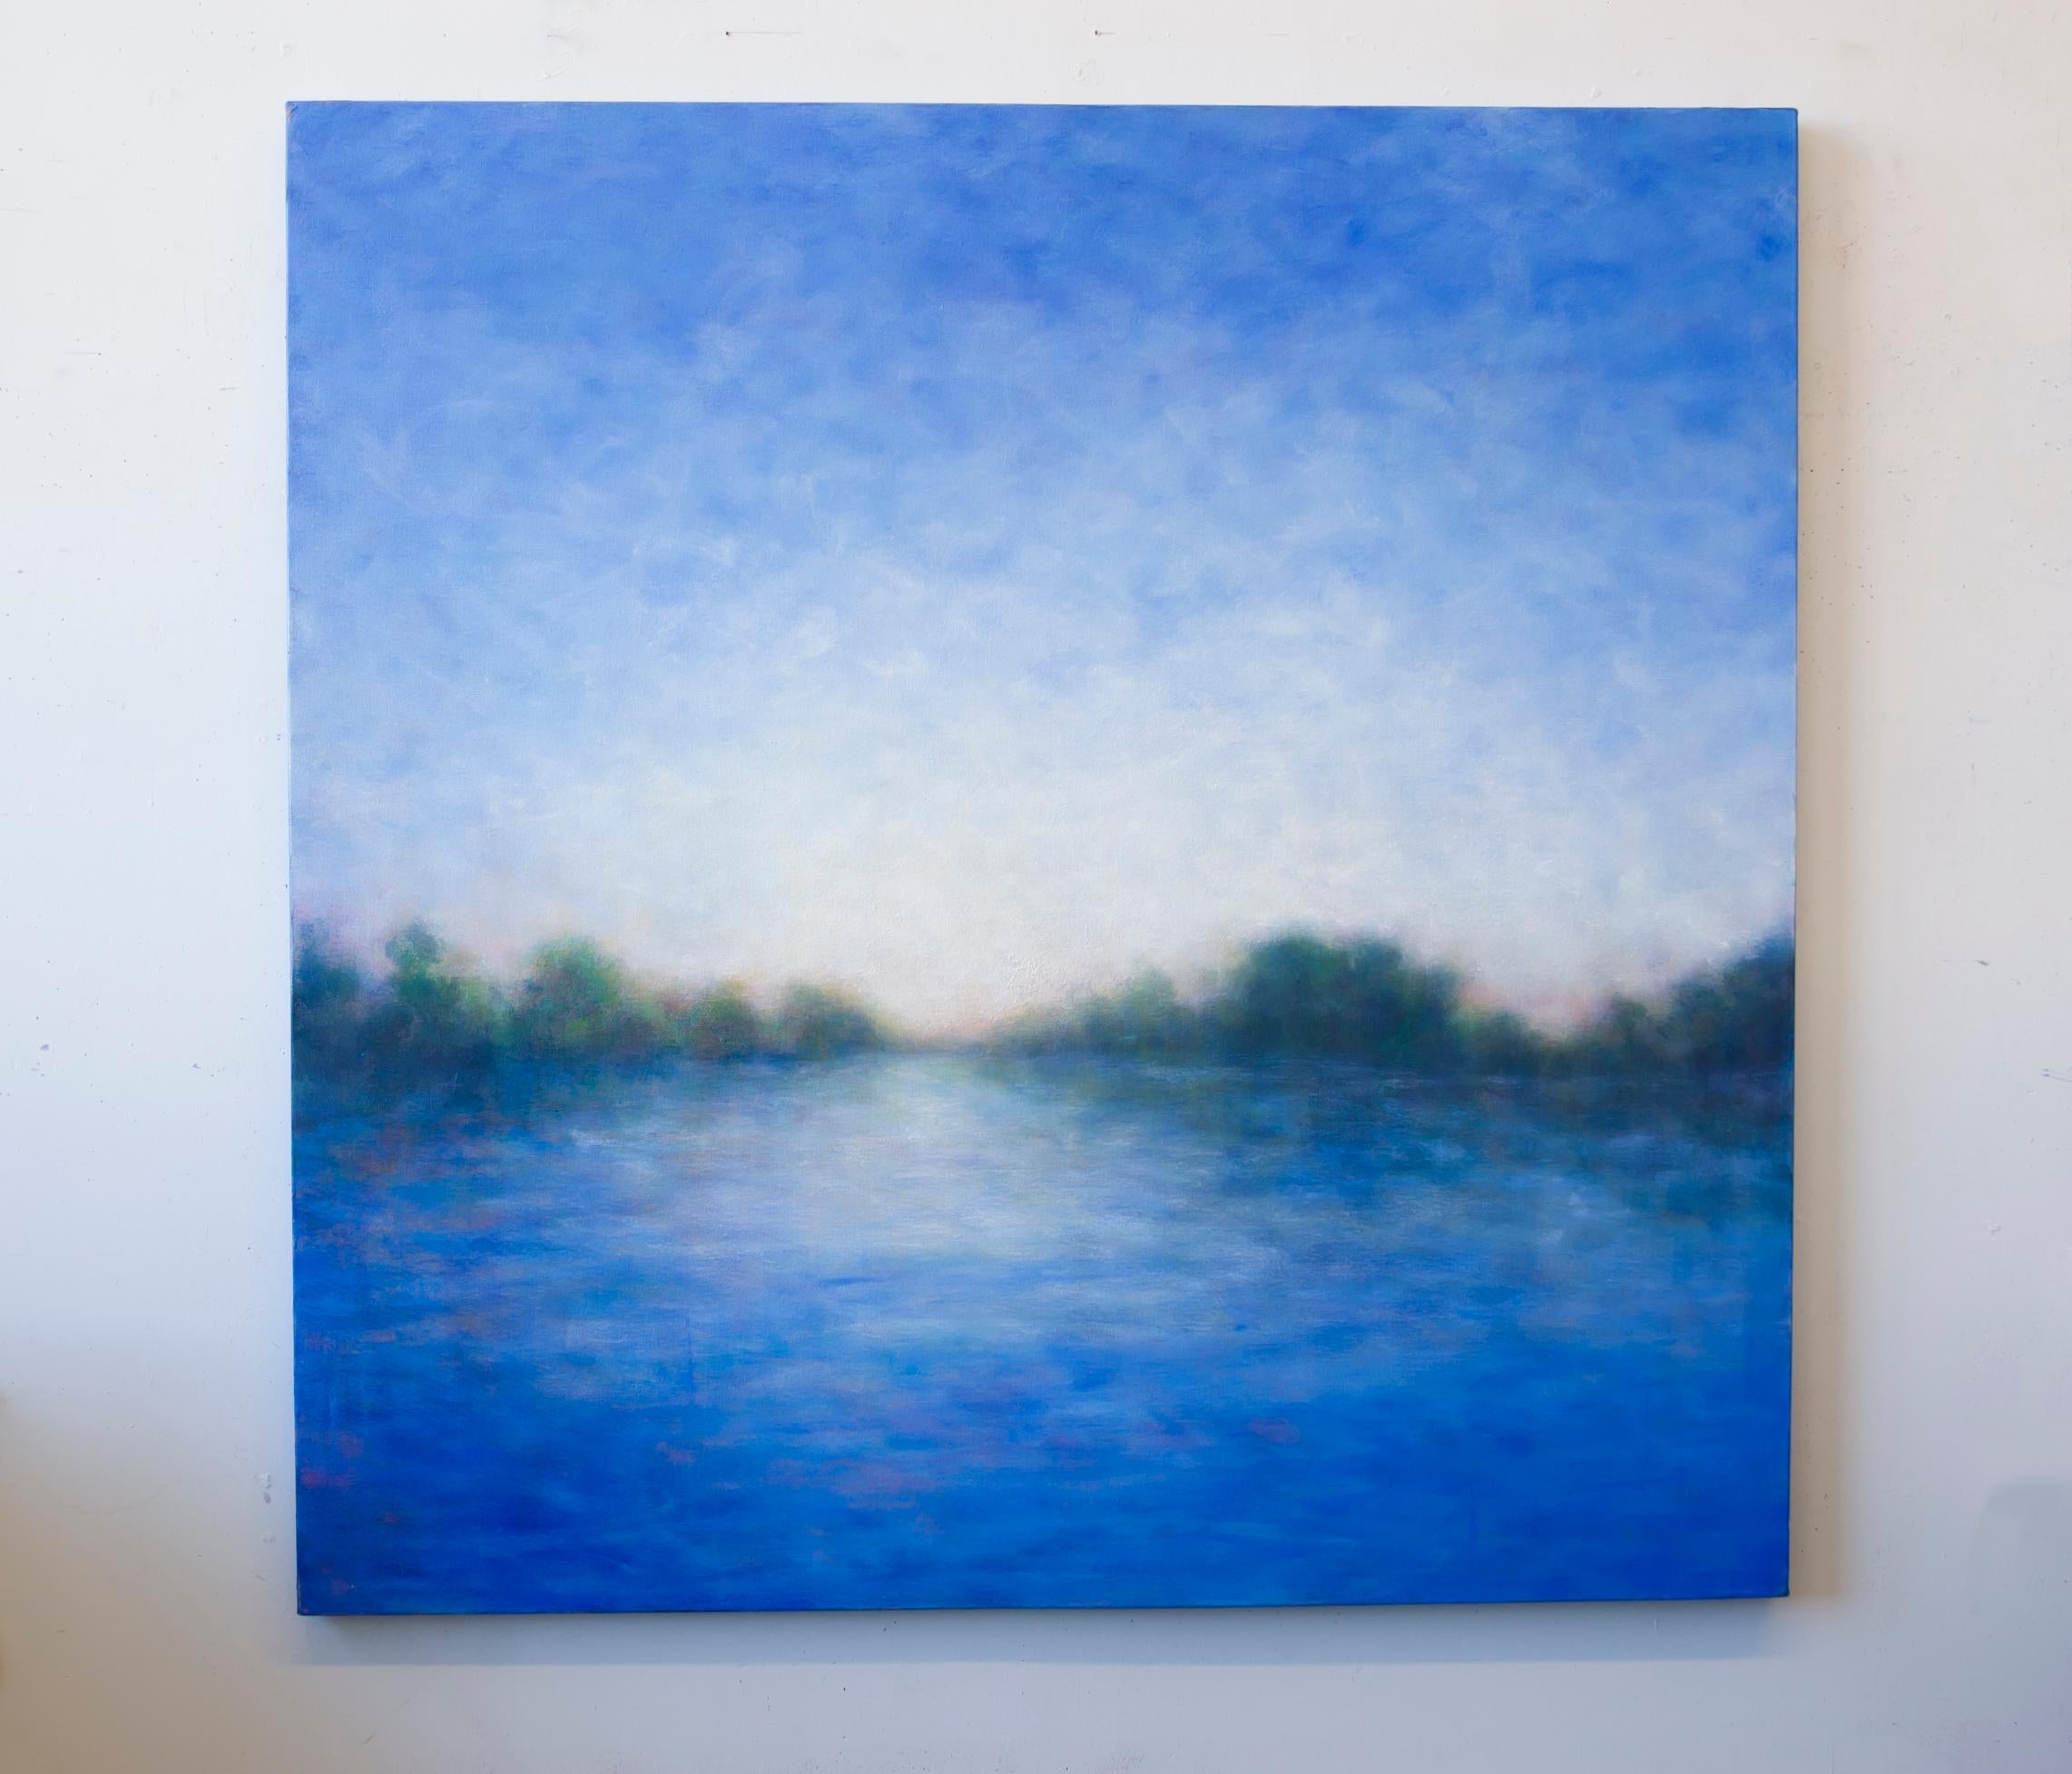 <p>Artist Comments<br>This painting is a memory of the Rogue River in Oregon. One summer, while on a cruise down the river, I felt a connection to the passing landscape. I paid close attention to the changing light and how it was reflecting on the